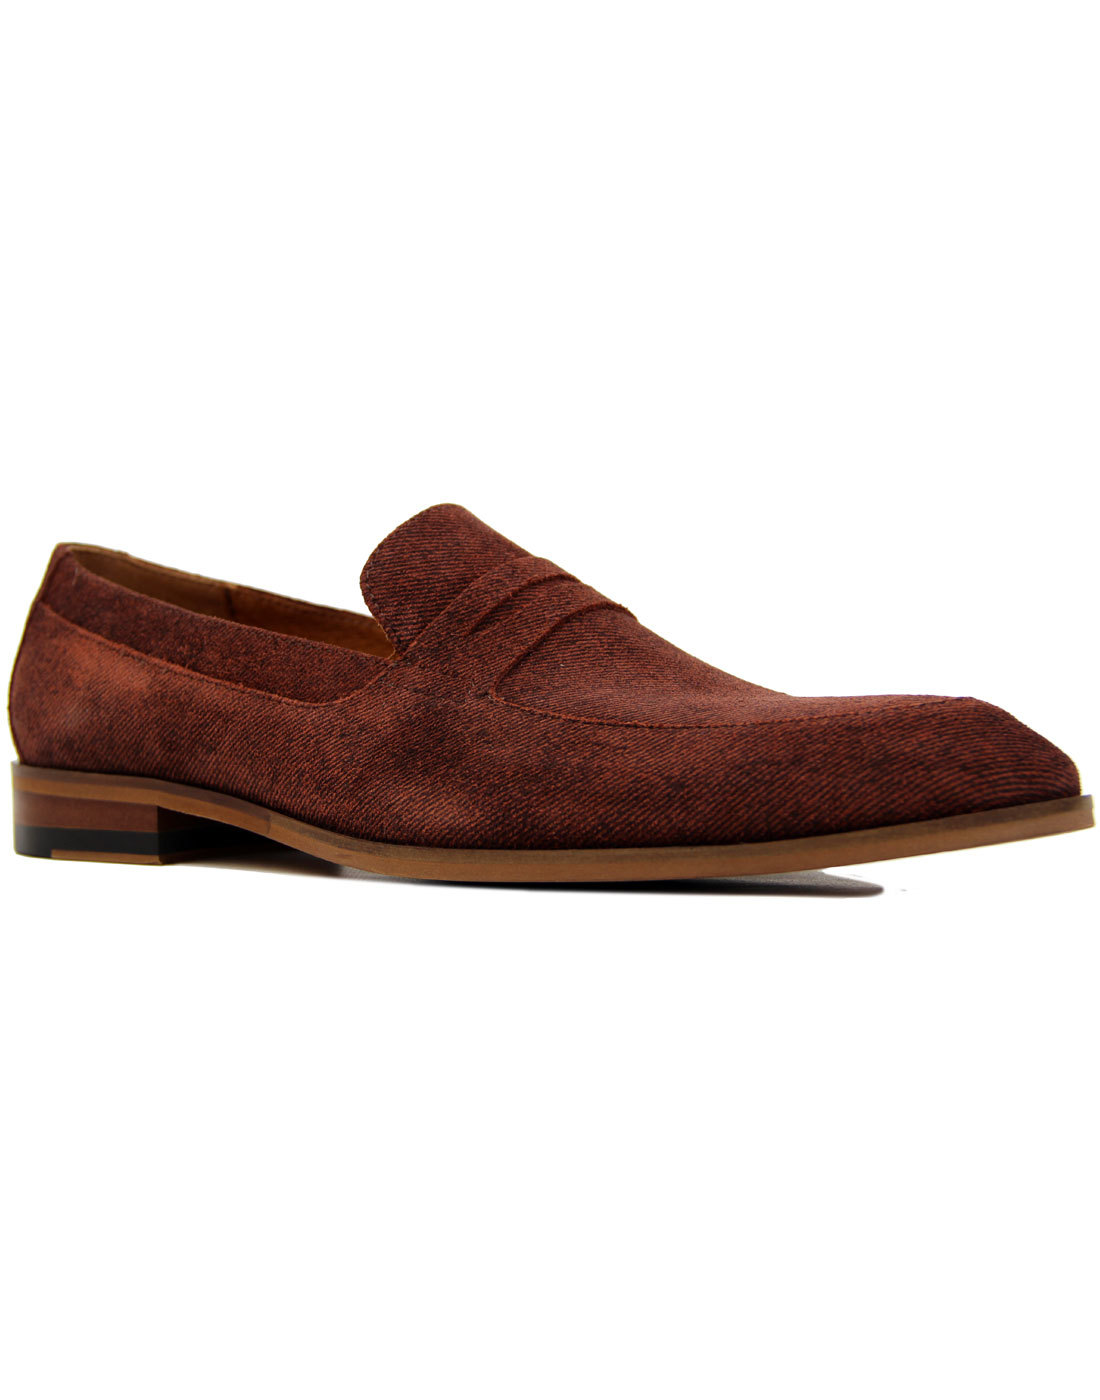 LACUZZO Retro Mod Two Tone Textured Suede Loafers